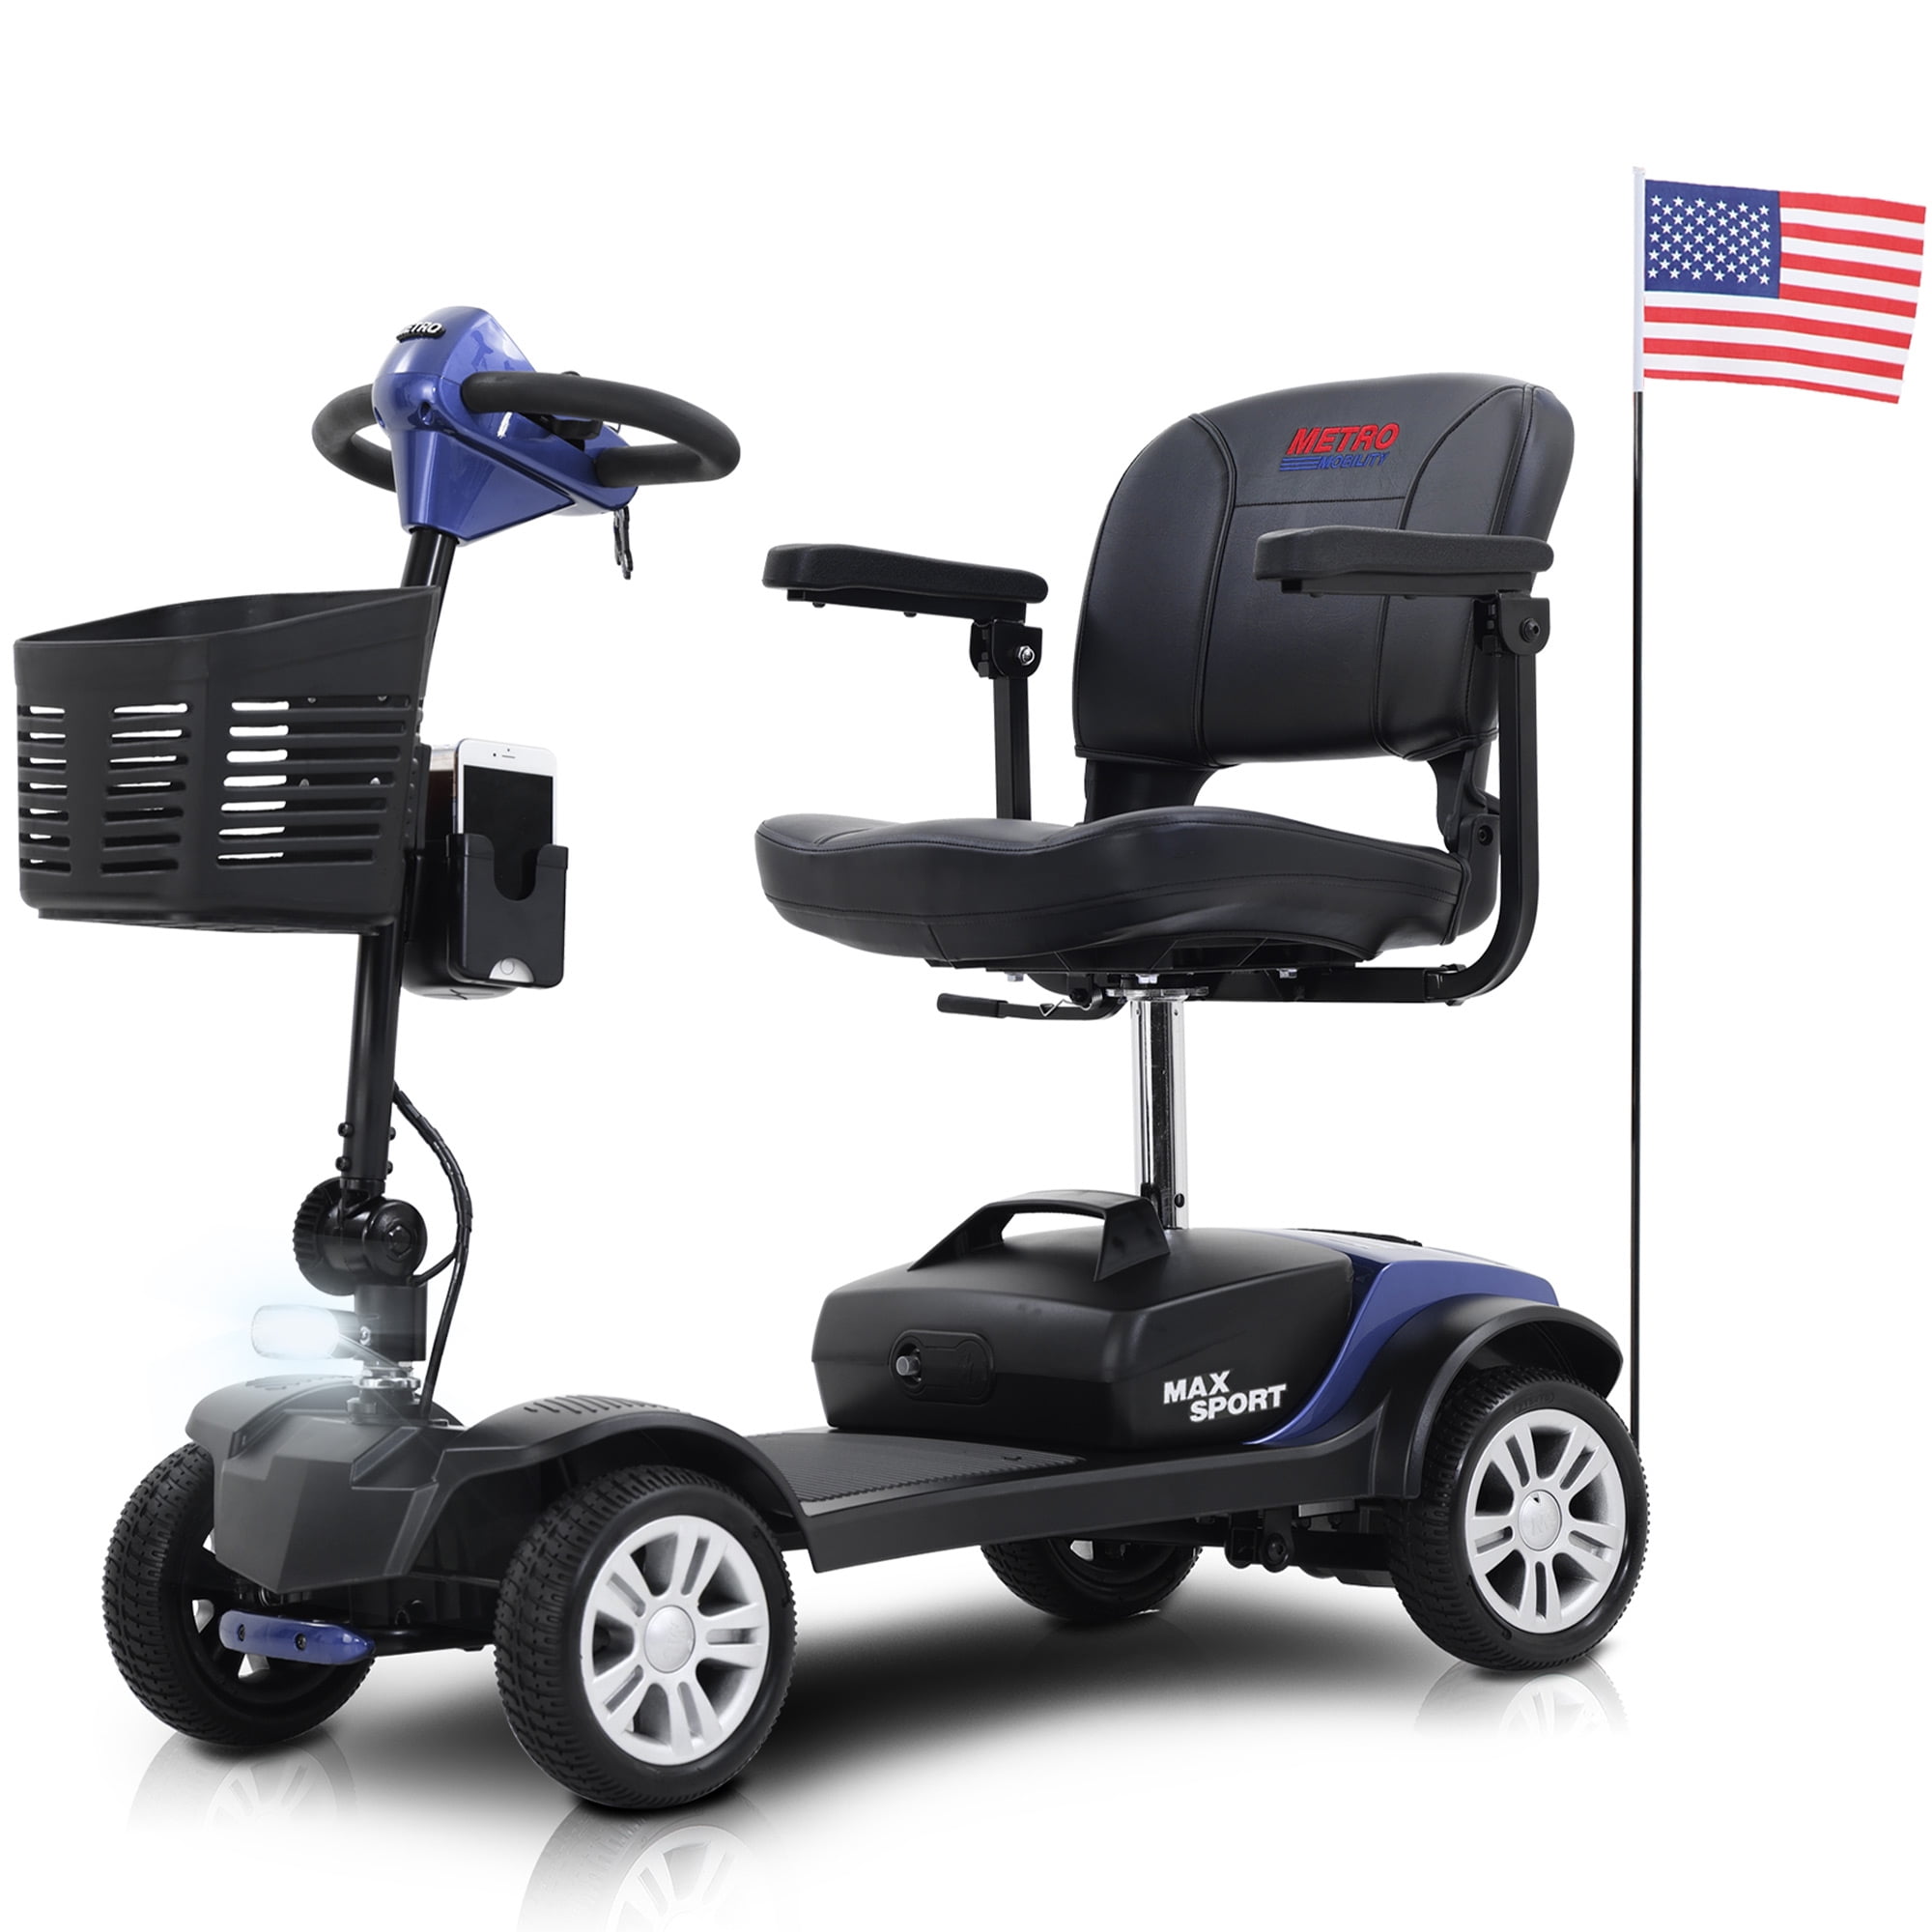 Electric Mobility Scooter, Outdoor Compact Motorized Scooter with 2 in 1 Cup & Holder, Duty Power for Seniors, Easy Assembly, 300lbs, Blue, SS1938 - Walmart.com